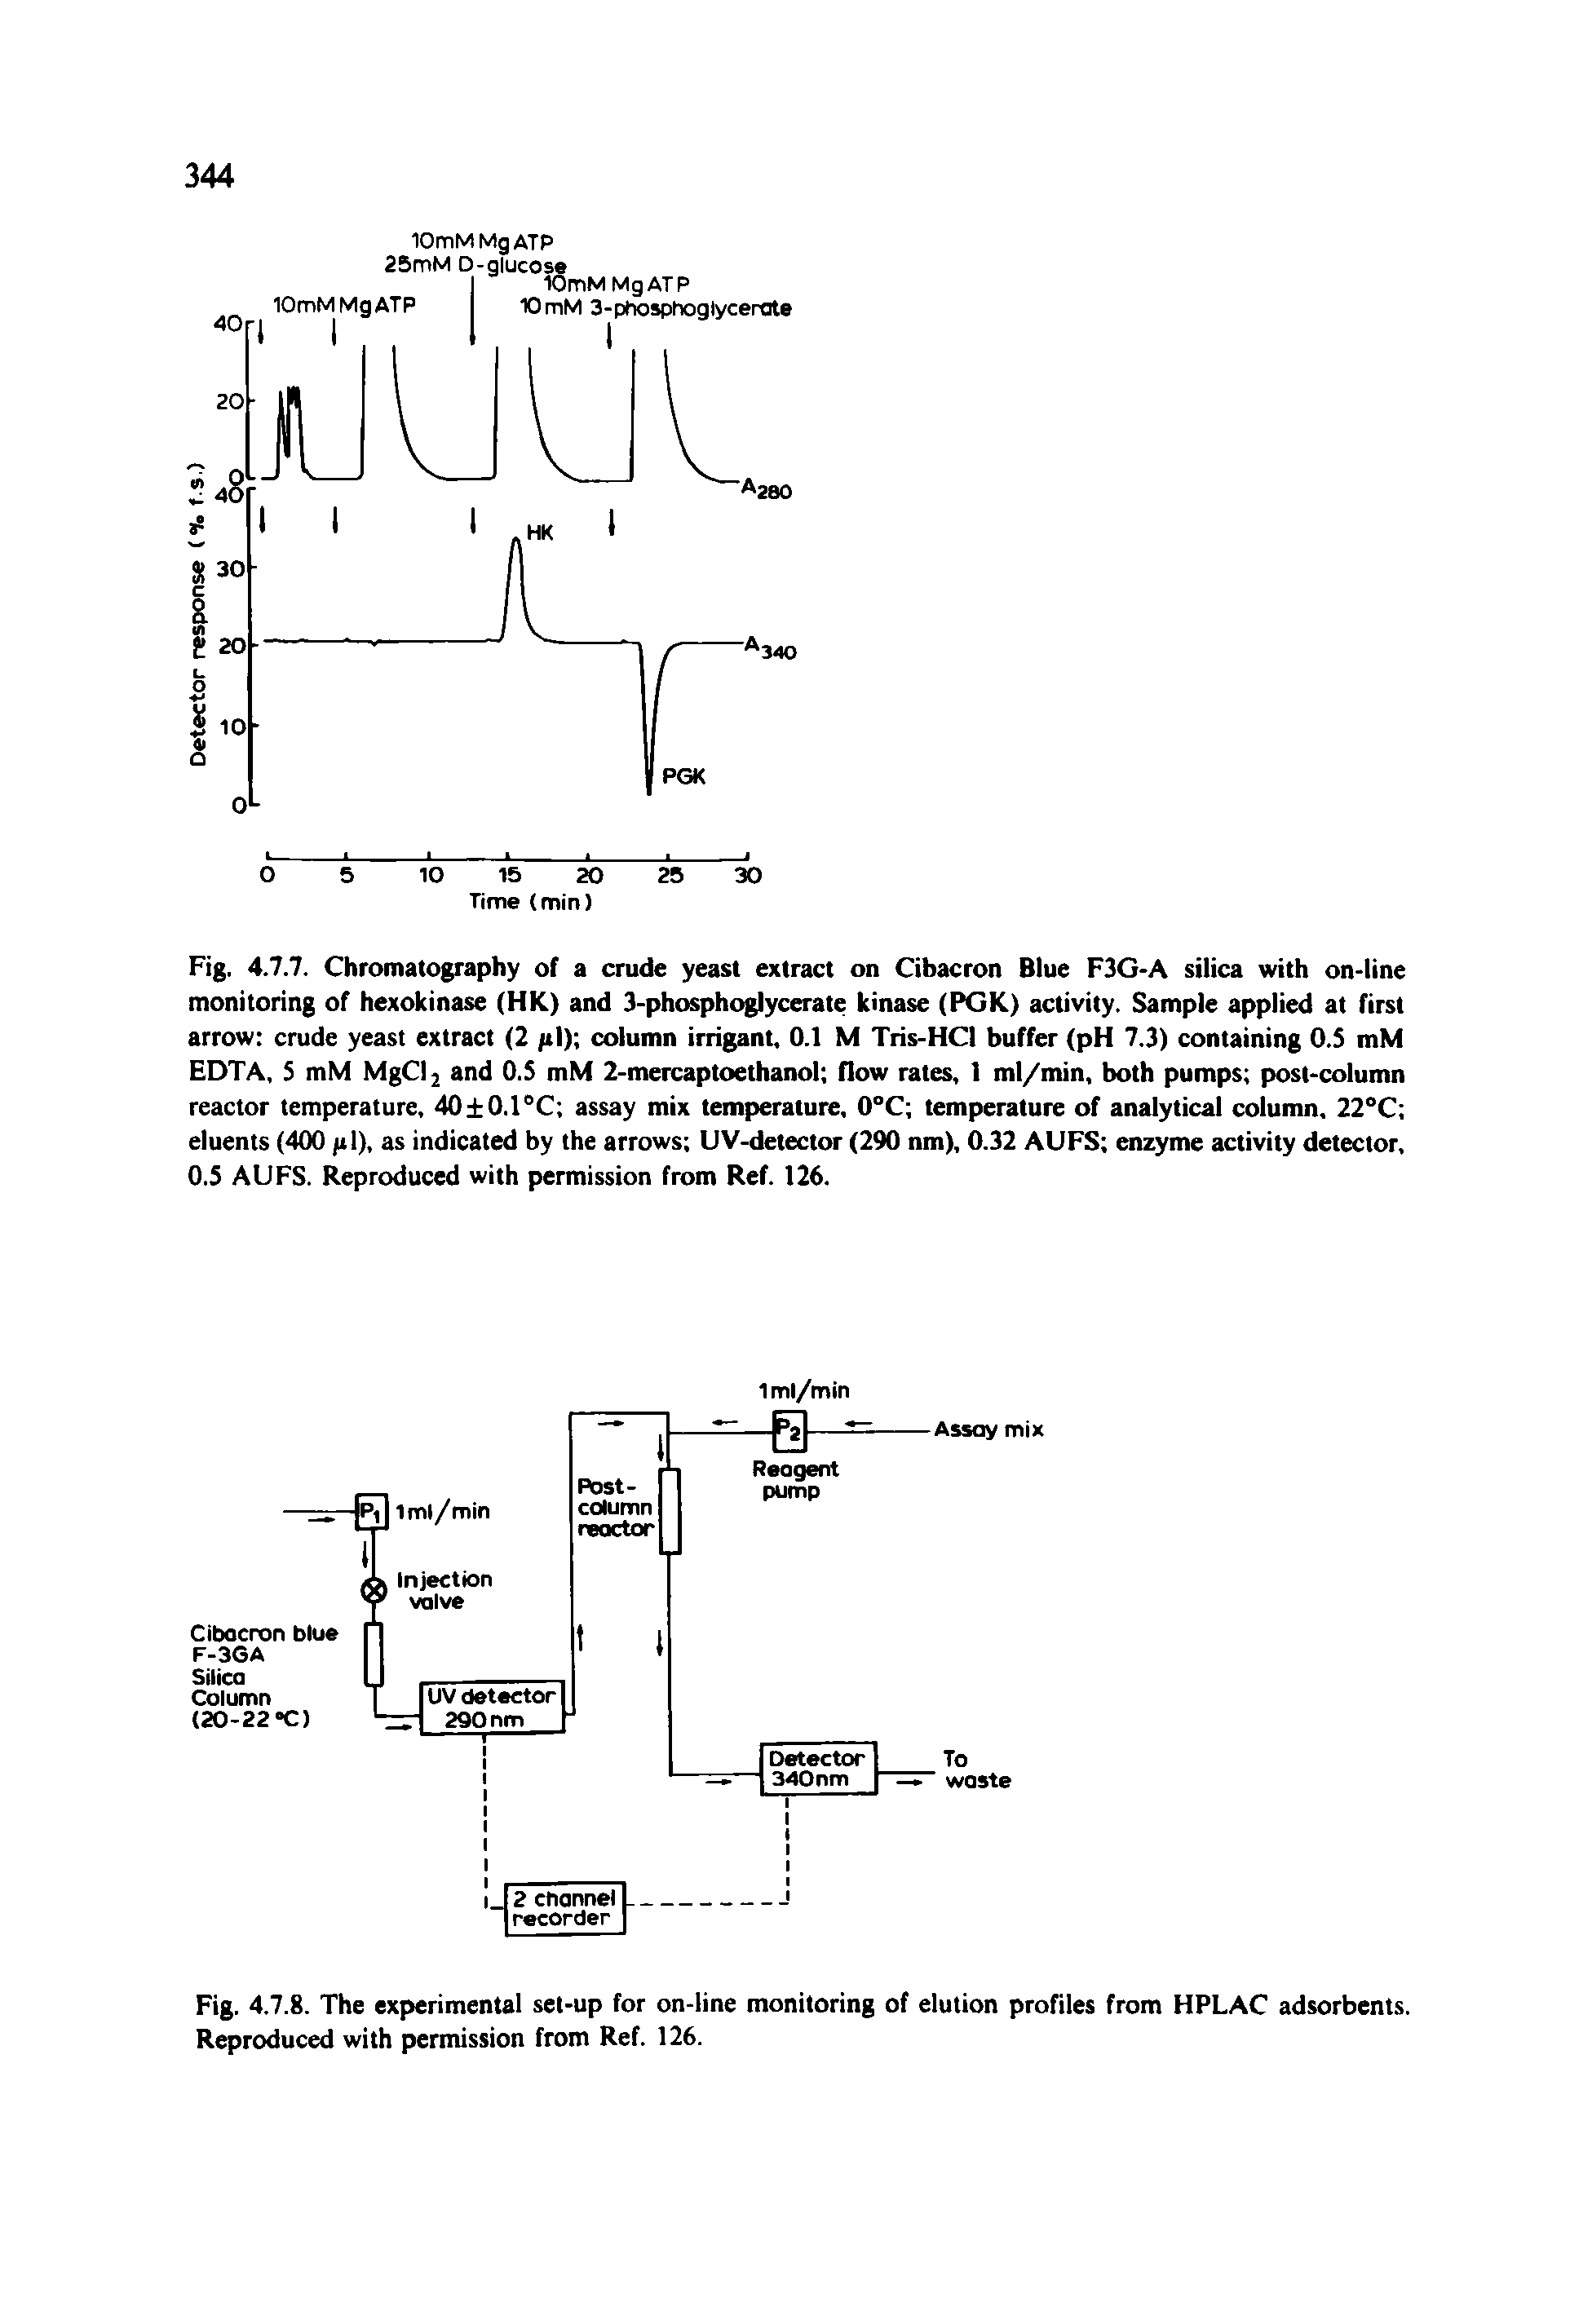 Fig. 4.7.7. Chromatography of a crude yeast extract on Cibacron Blue F3G-A silica with on-line monitoring of hexokinase (HK) and 3-phosphoglycerate kinase (PGK) activity. Sample applied at first arrow crude yeast extract (2 pi) column irrigant, 0.1 M Tris-HCI buffer (pH 7.3) containing O.S mM EDTA, 5 mM MgClj and O.S mM 2-mercaptoethanol flow rates, I ml/min, both pumps post-column reactor temperature, 40 0.1°C assay mix temperature, 0°C temperature of analytical column, 22°C eluents (400 pi), as indicated by the arrows UV-detector (290 nm), 0.32 AUFS enzyme activity detector, 0.5 AUFS. Reproduced with permission from Ref. 126.